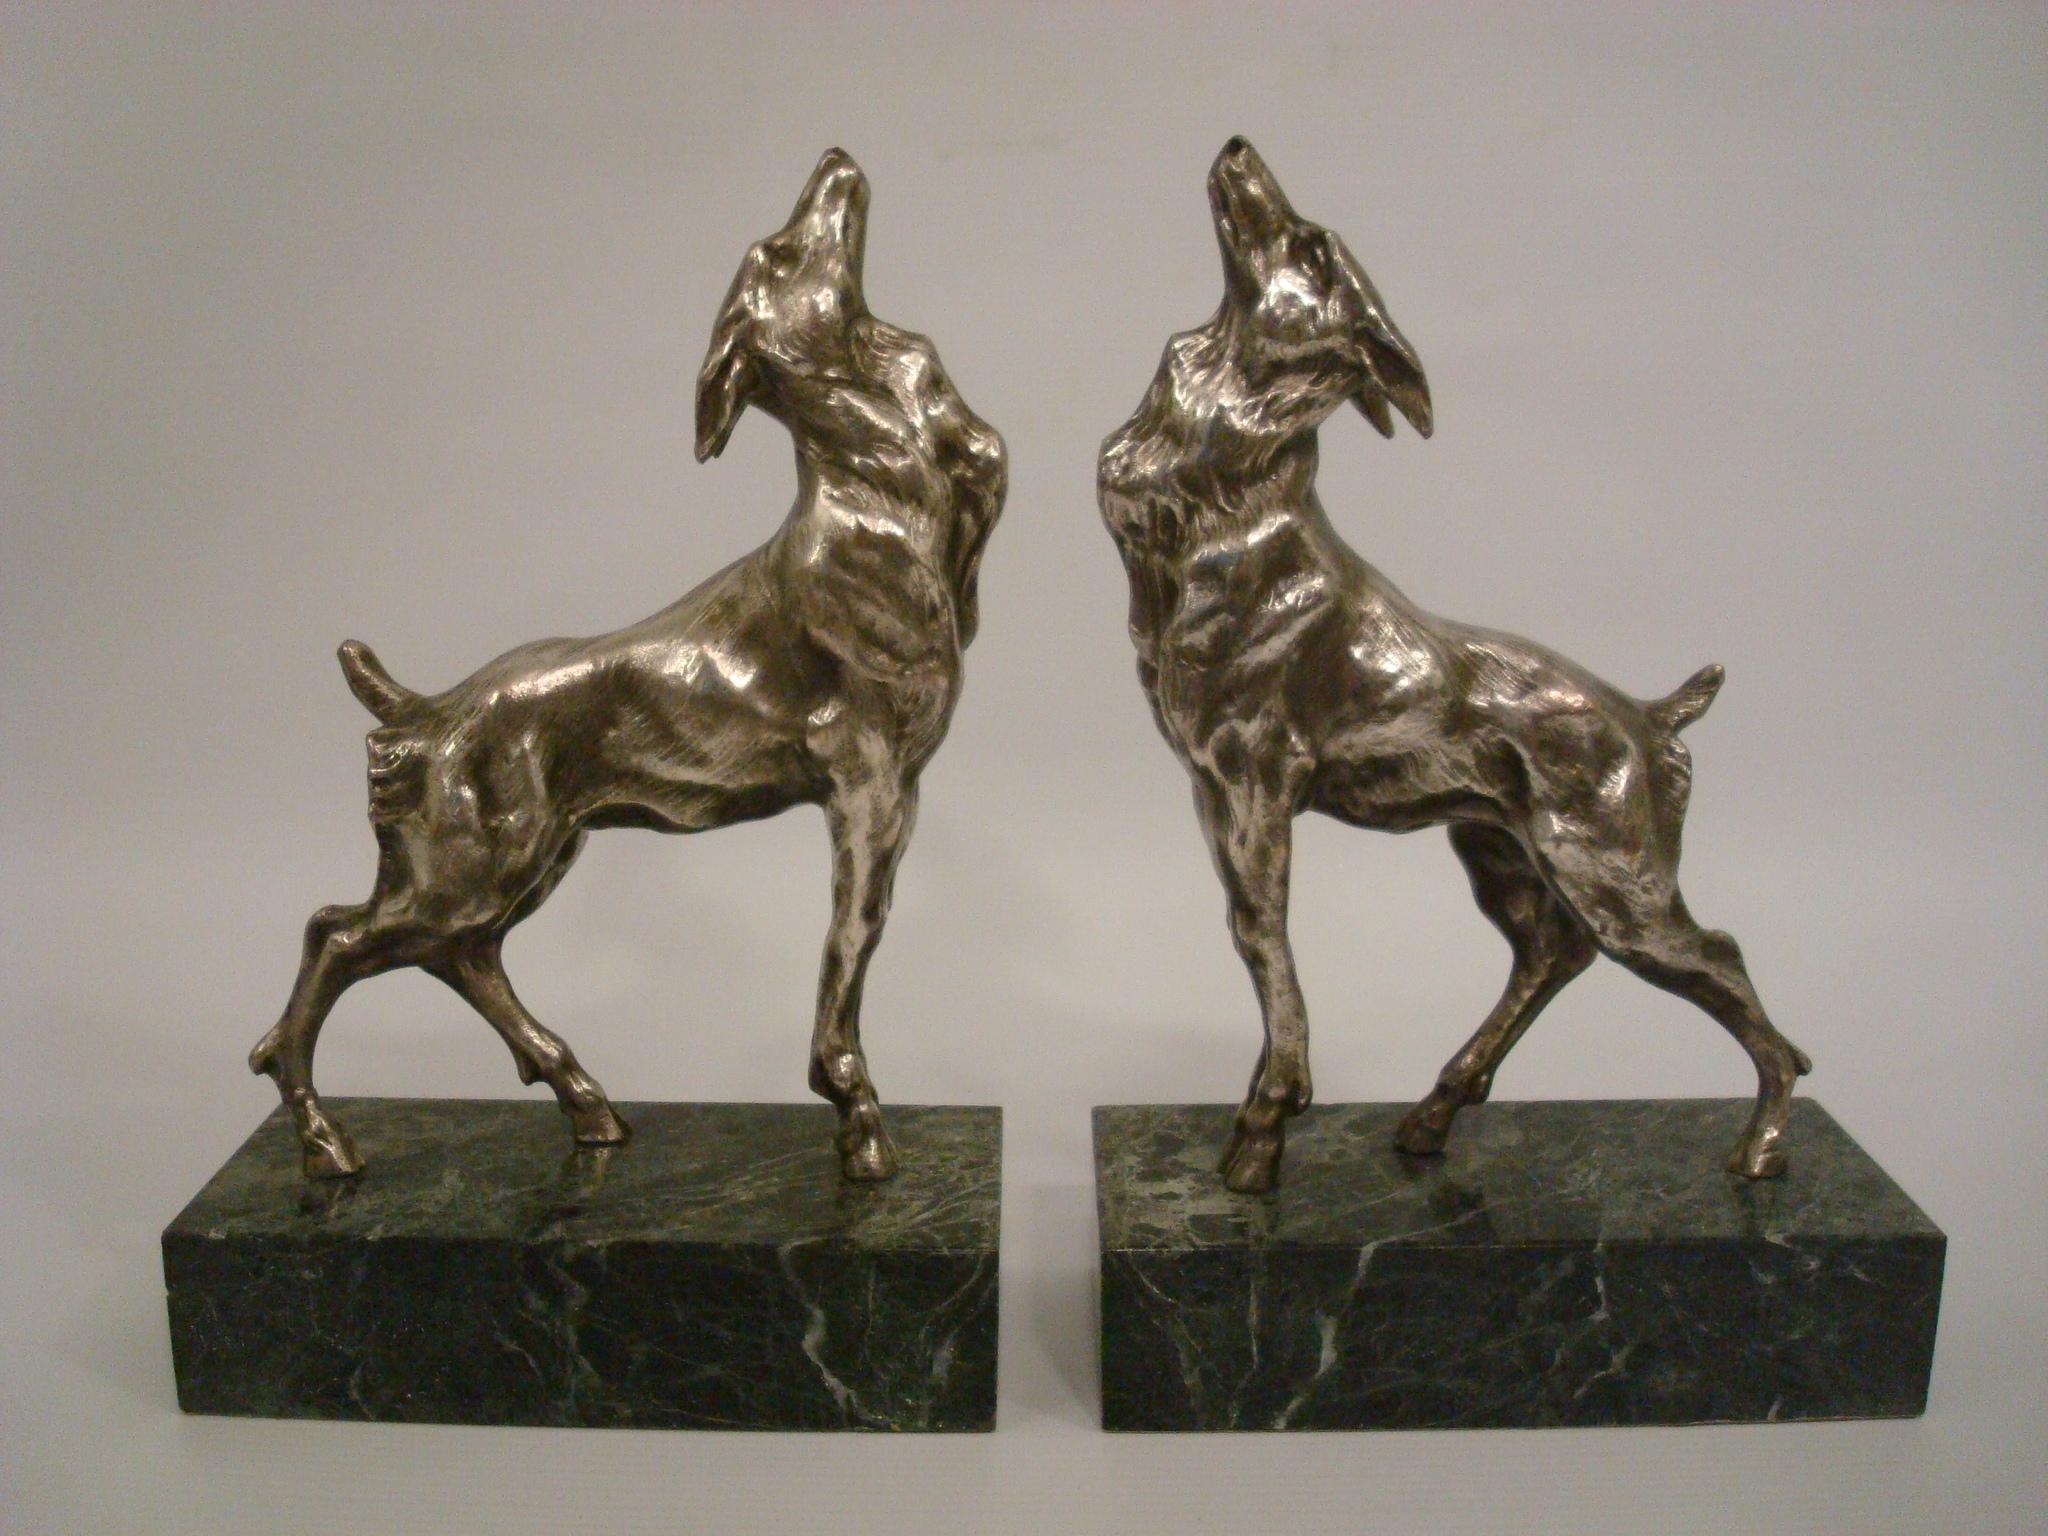 Art Deco Bookends. Emile Joseph Nestor Carlier, (French, 1849-1927). Figural Goat Bookends. Silvered Metal mounted over Green Marble bases. Nice and heavy.